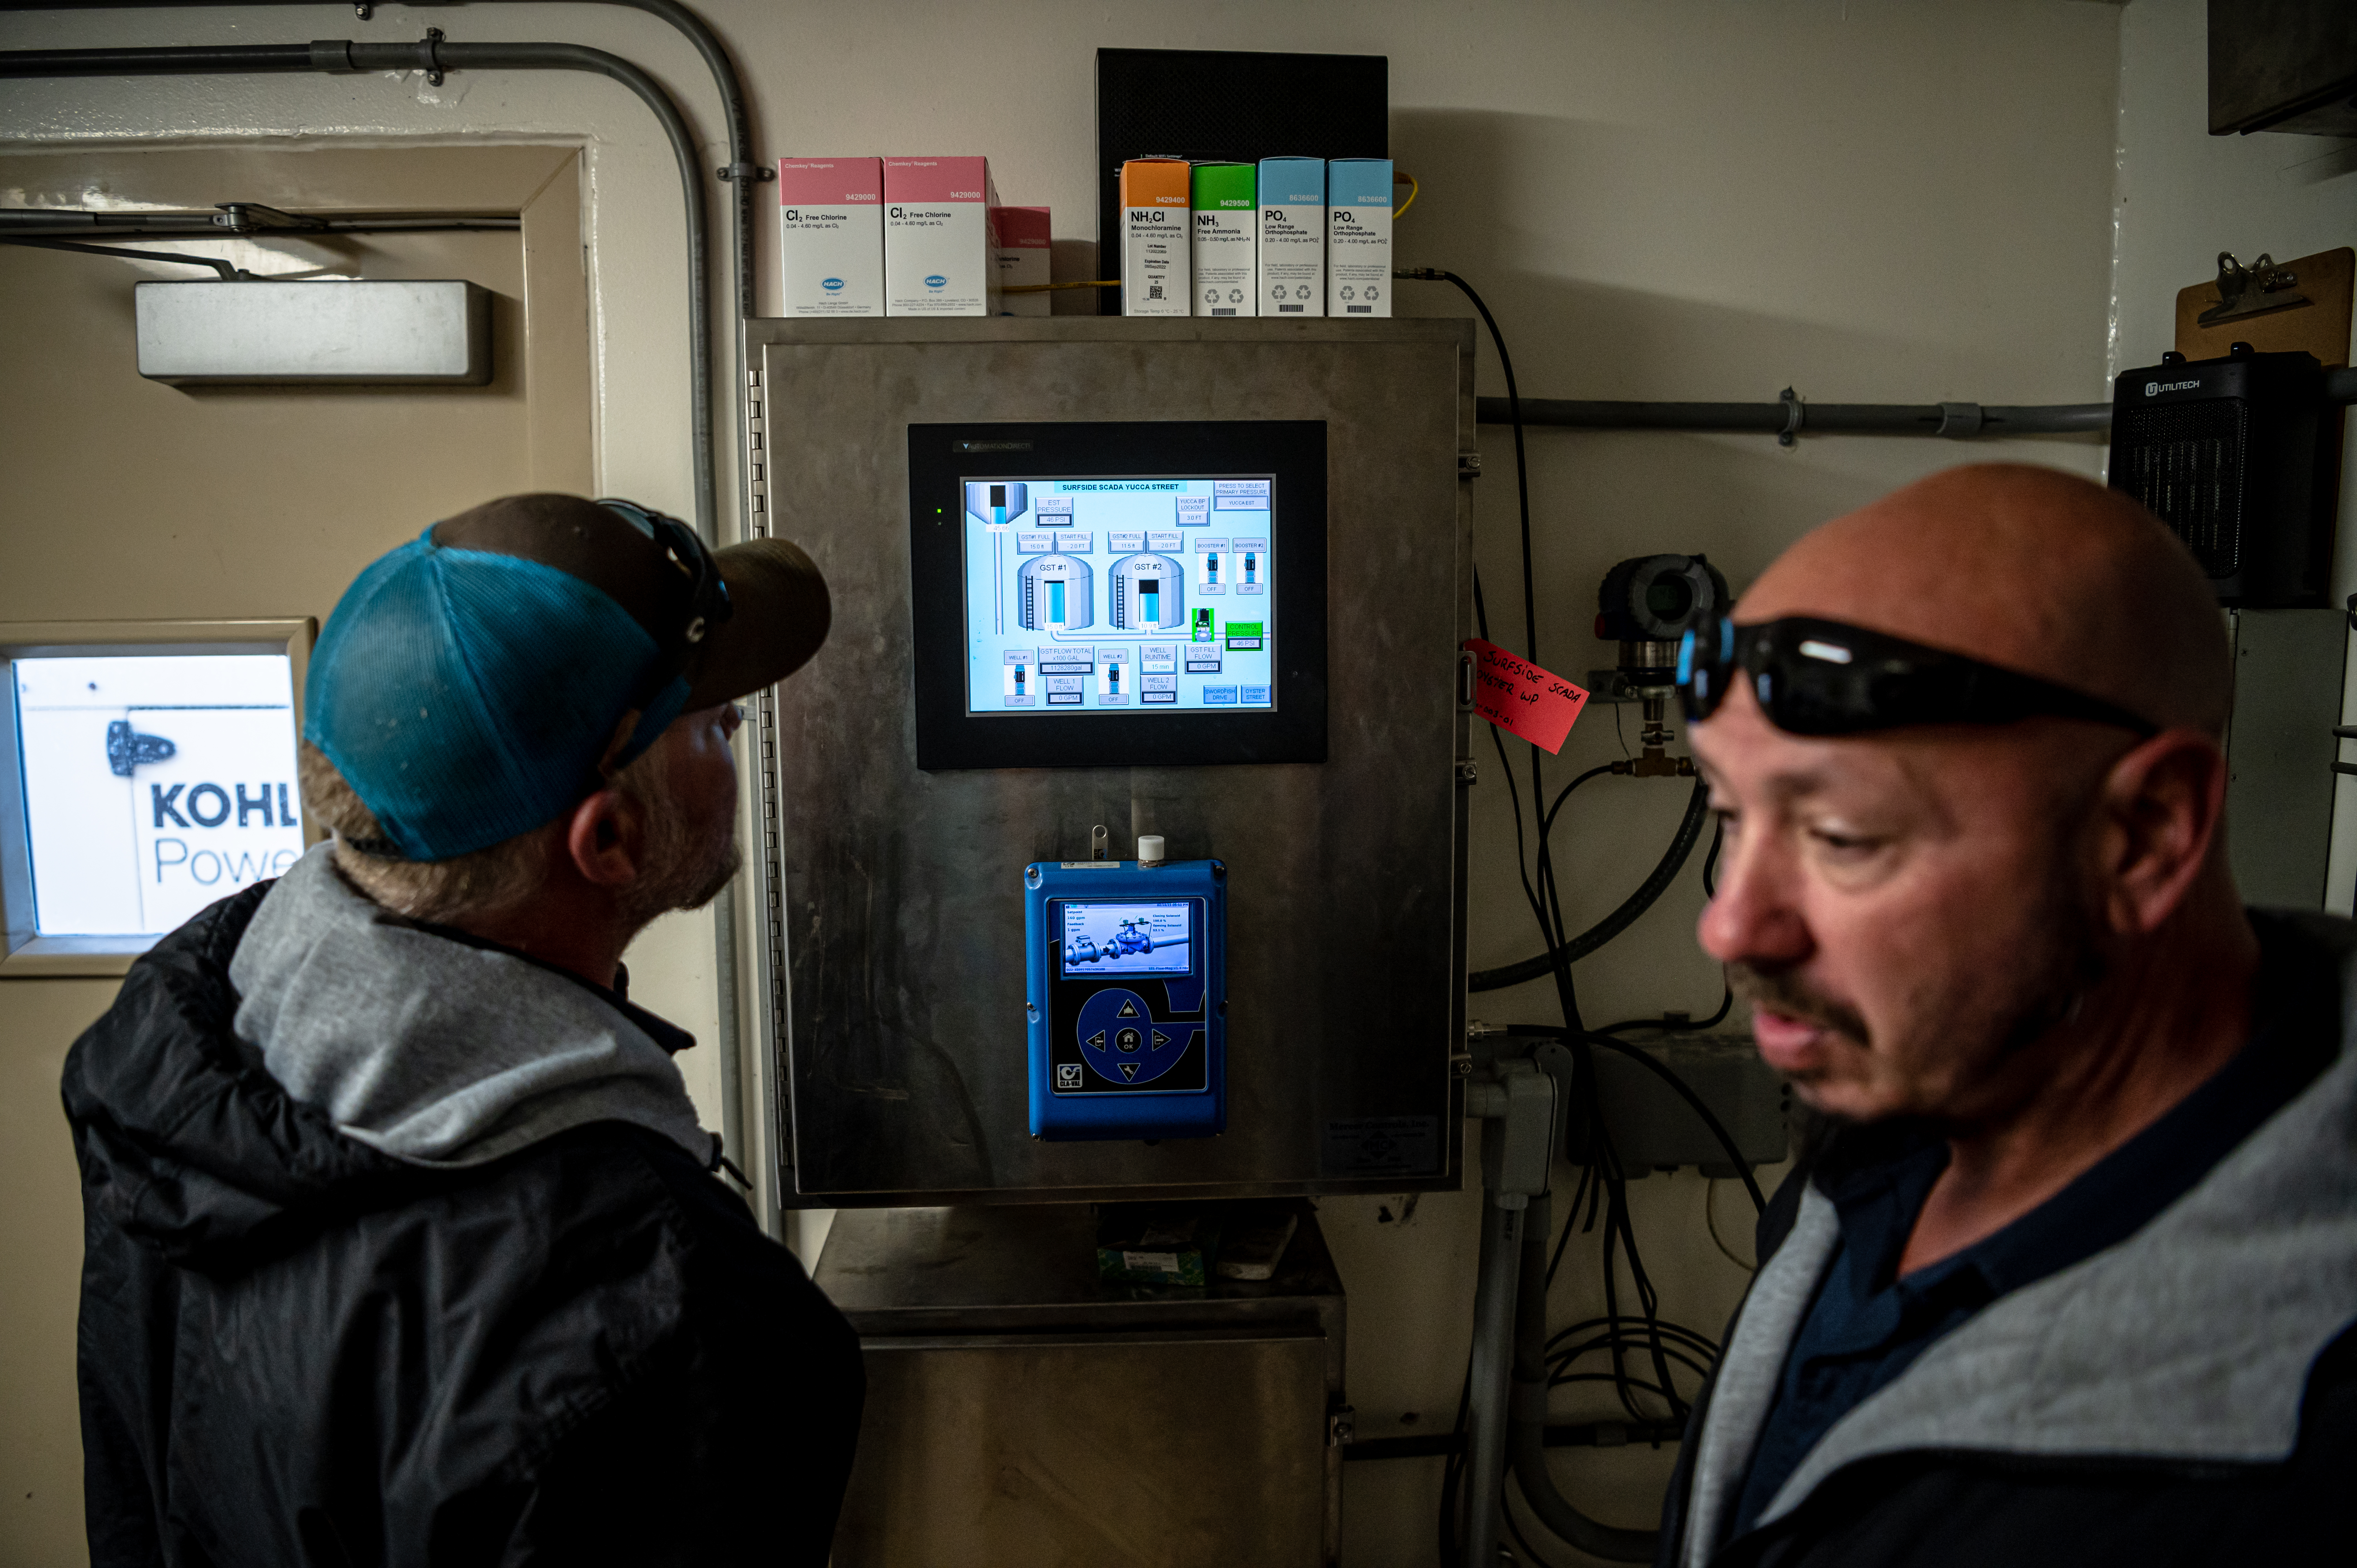 Two men in hoodies, one wearing a ball cap, examine a digital readout on a water pumping system. 